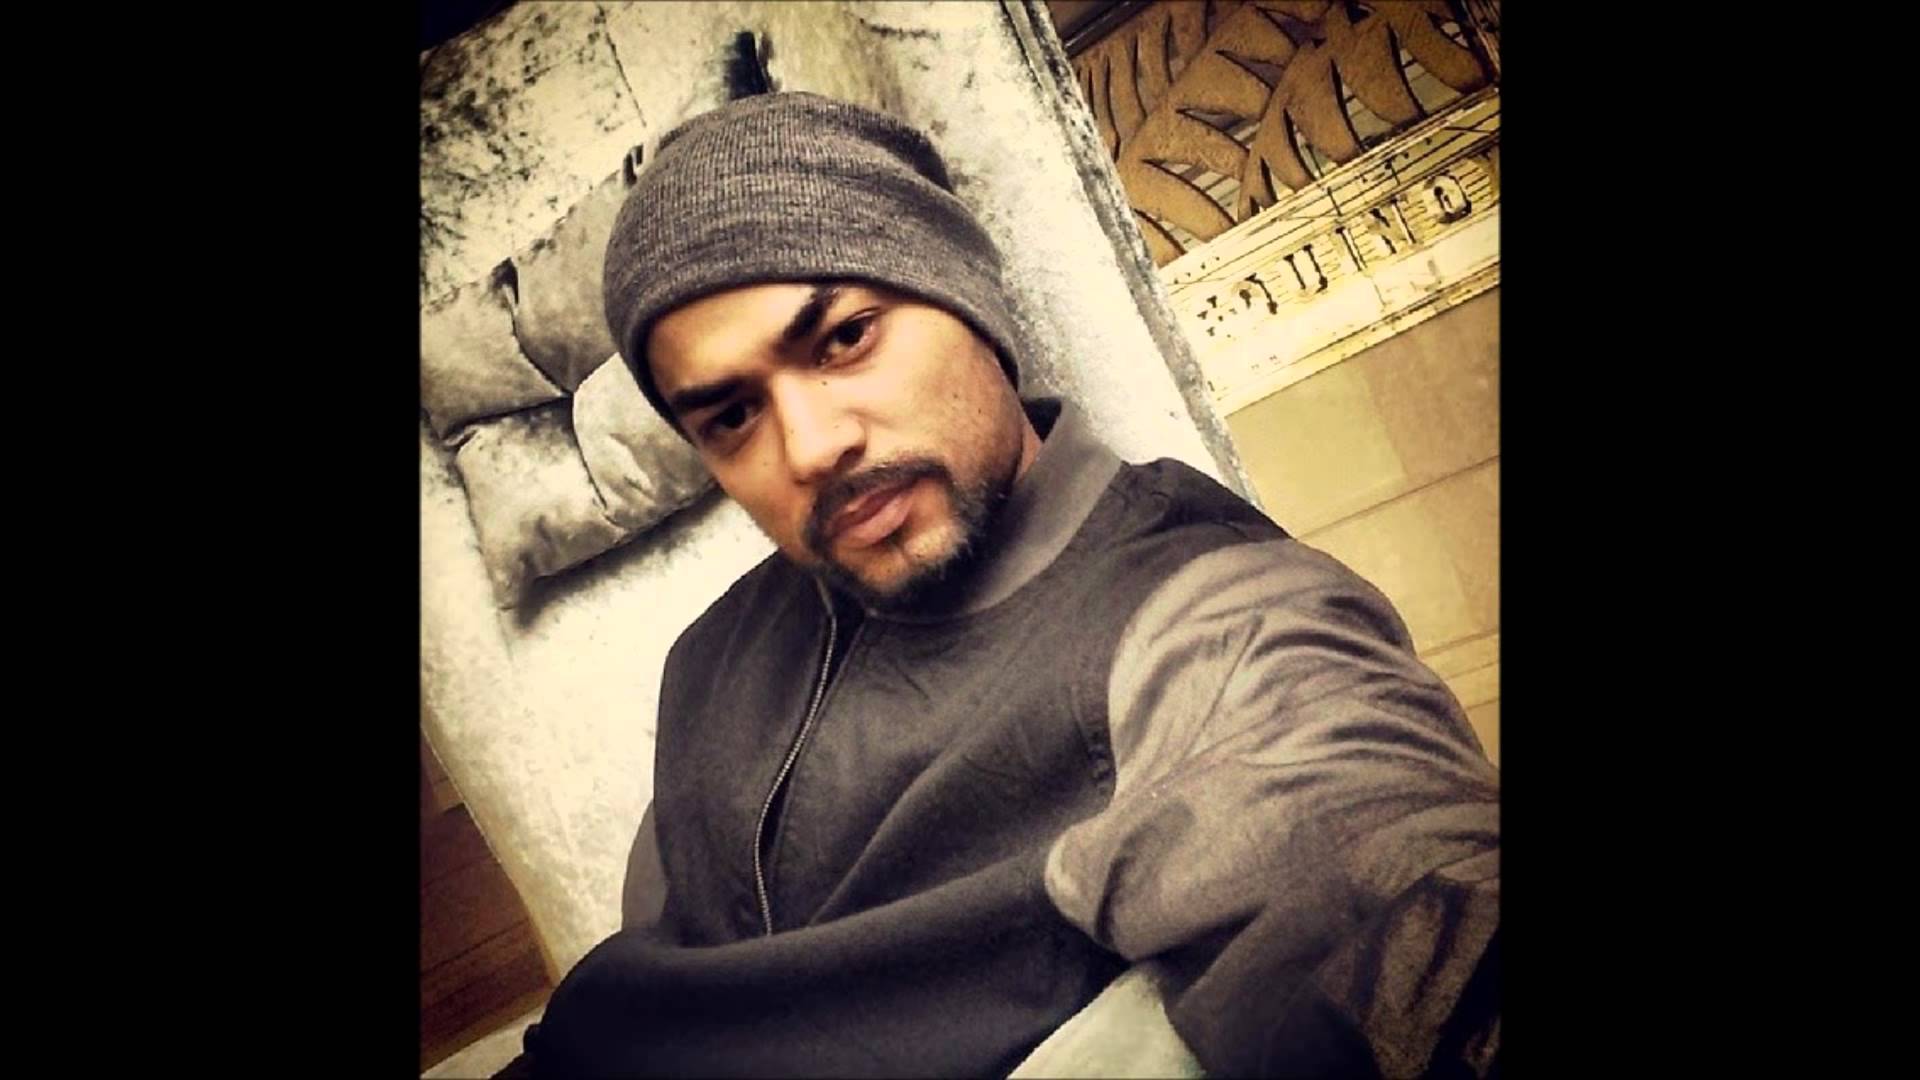 1261 Likes 29 Comments  𝔹𝕠𝕙𝕖𝕞𝕚𝕒ℂ𝕠𝕞𝕞𝕦𝕟𝕚𝕥𝕪 bohemiacommunity  on Instagram Su  Bohemia the punjabi rapper Bohemia rapper Bohemia  wallpaper